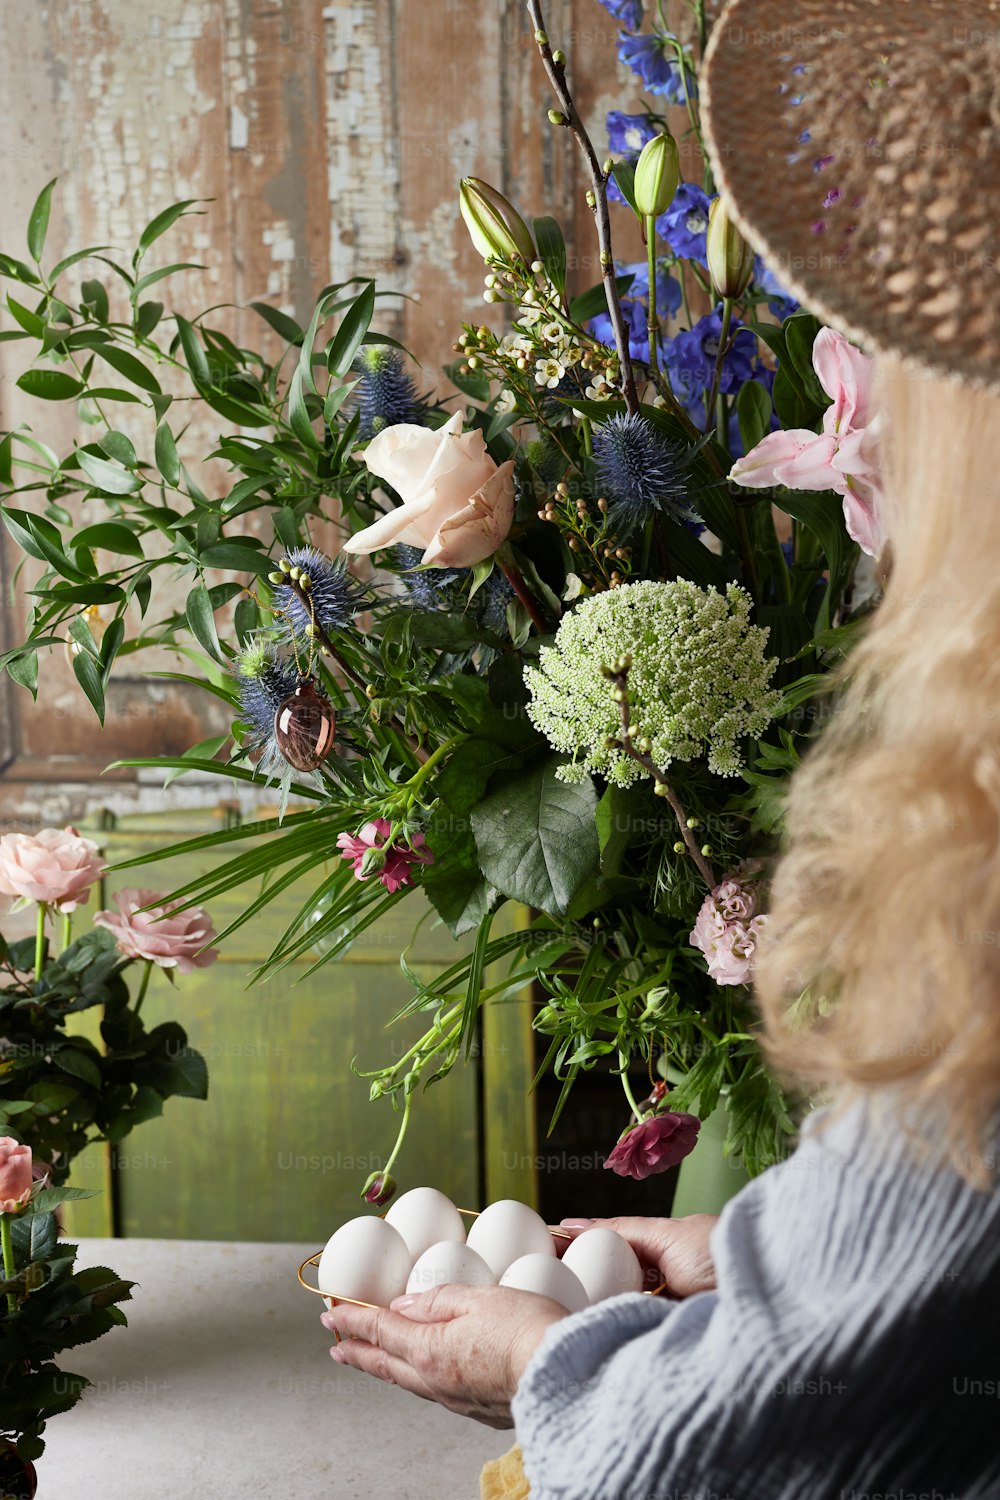 a woman in a straw hat holding eggs in front of flowers